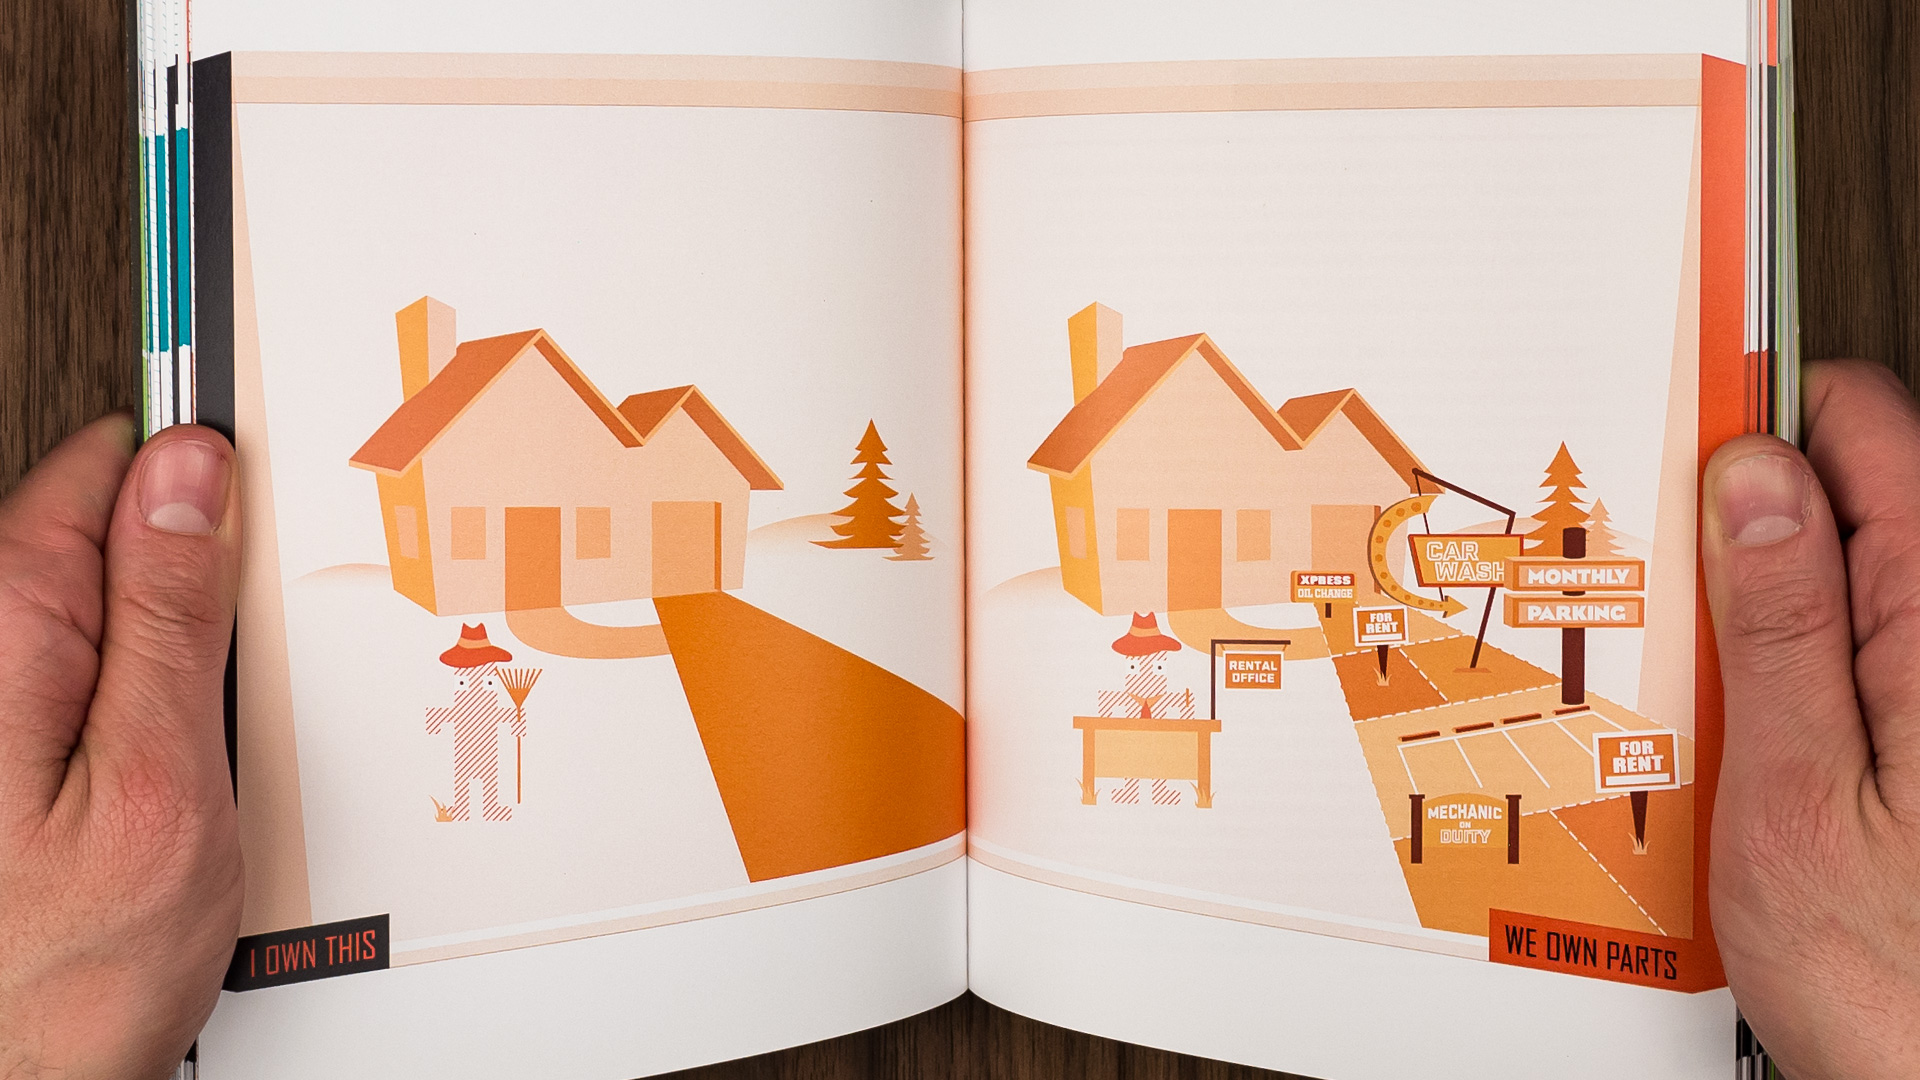 Illustration spread from Intel's Radical Flux book design created by Incubate Design